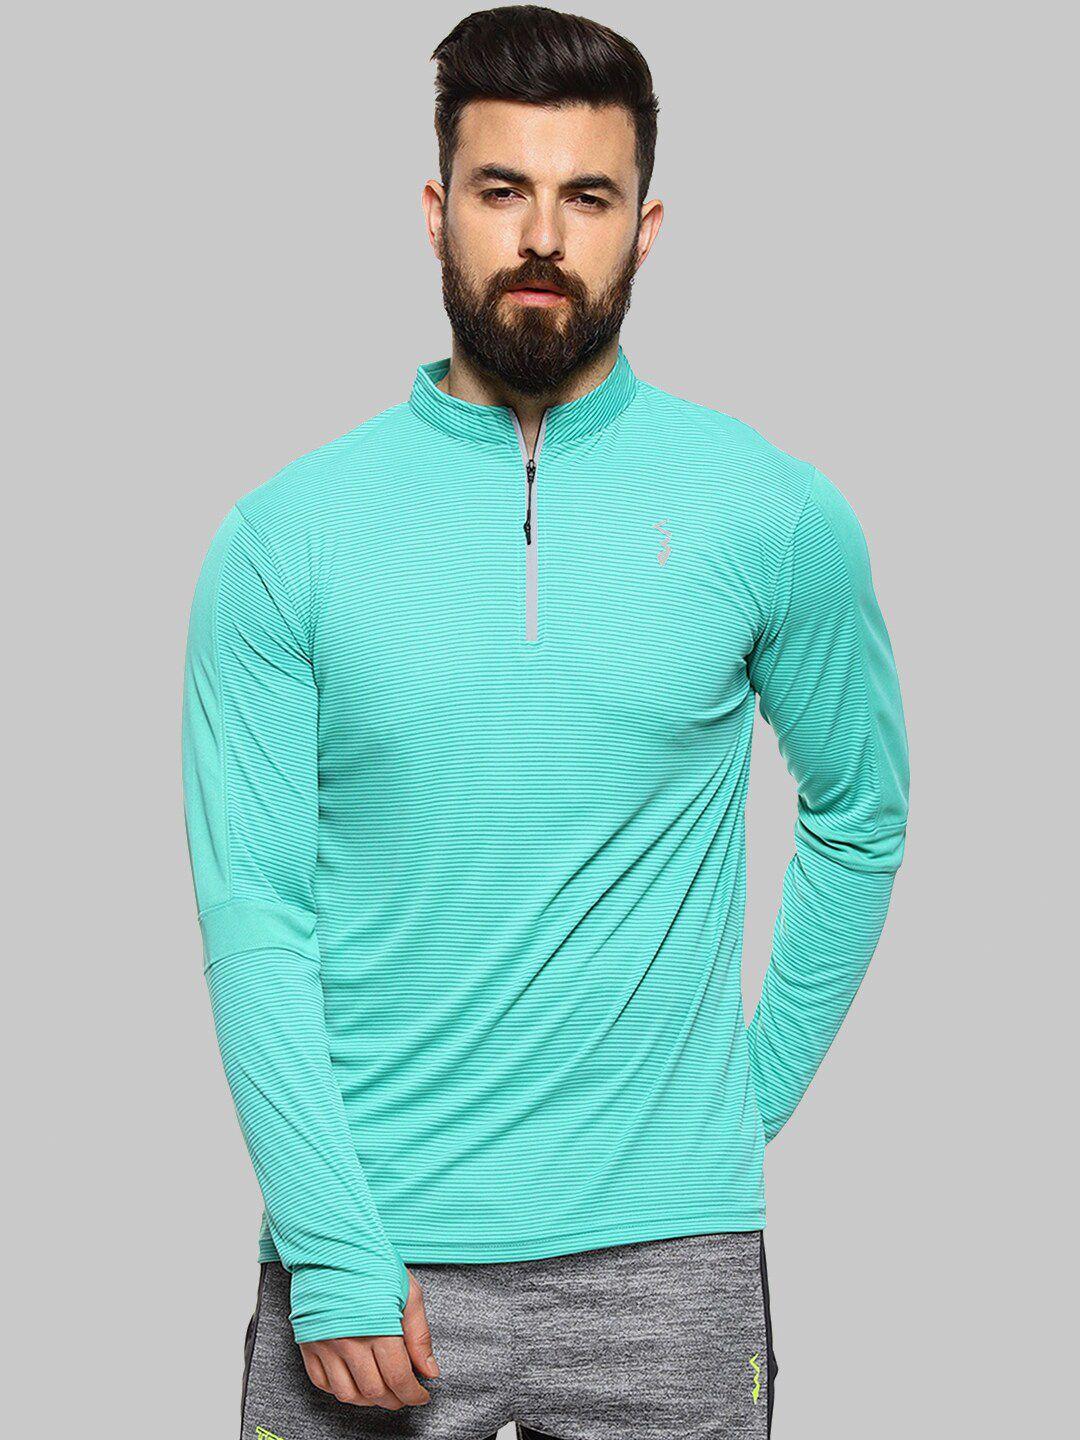 campus sutra high neck long sleeves sports t-shirt